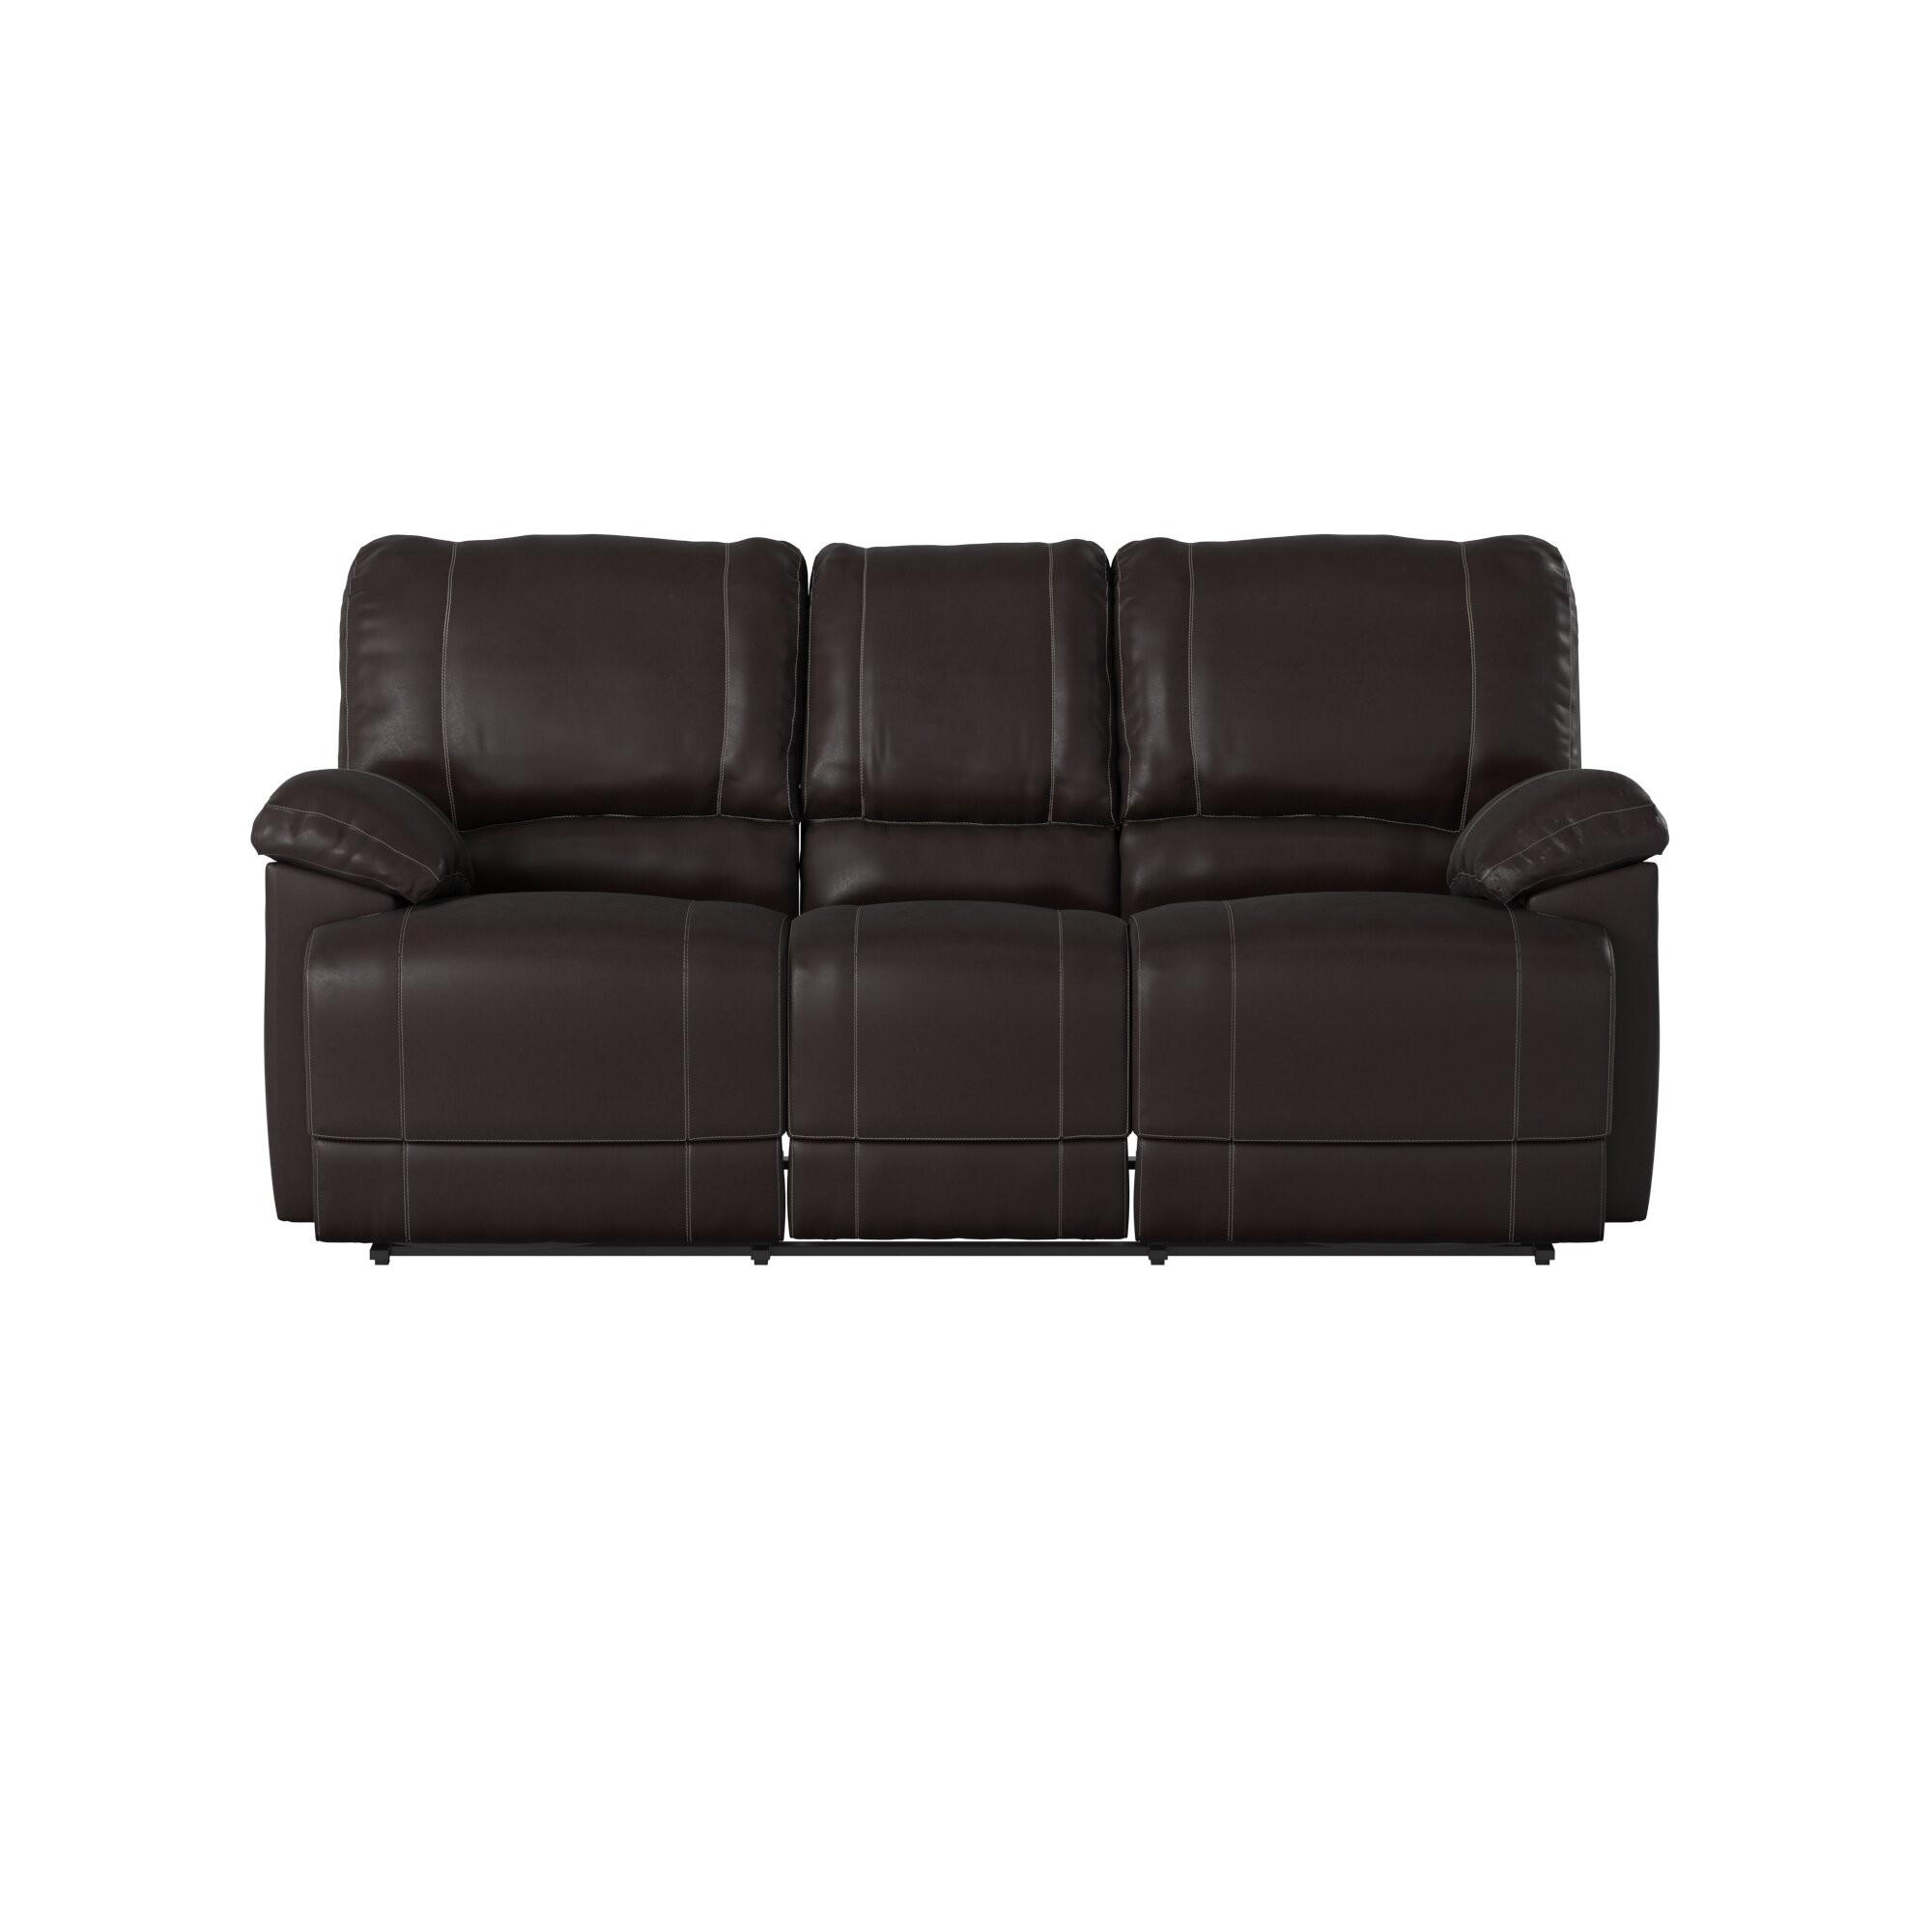 Transitional Reclining Sofa Cassville Sofa 8403-3-S 8403-3-S in Brown Faux Leather